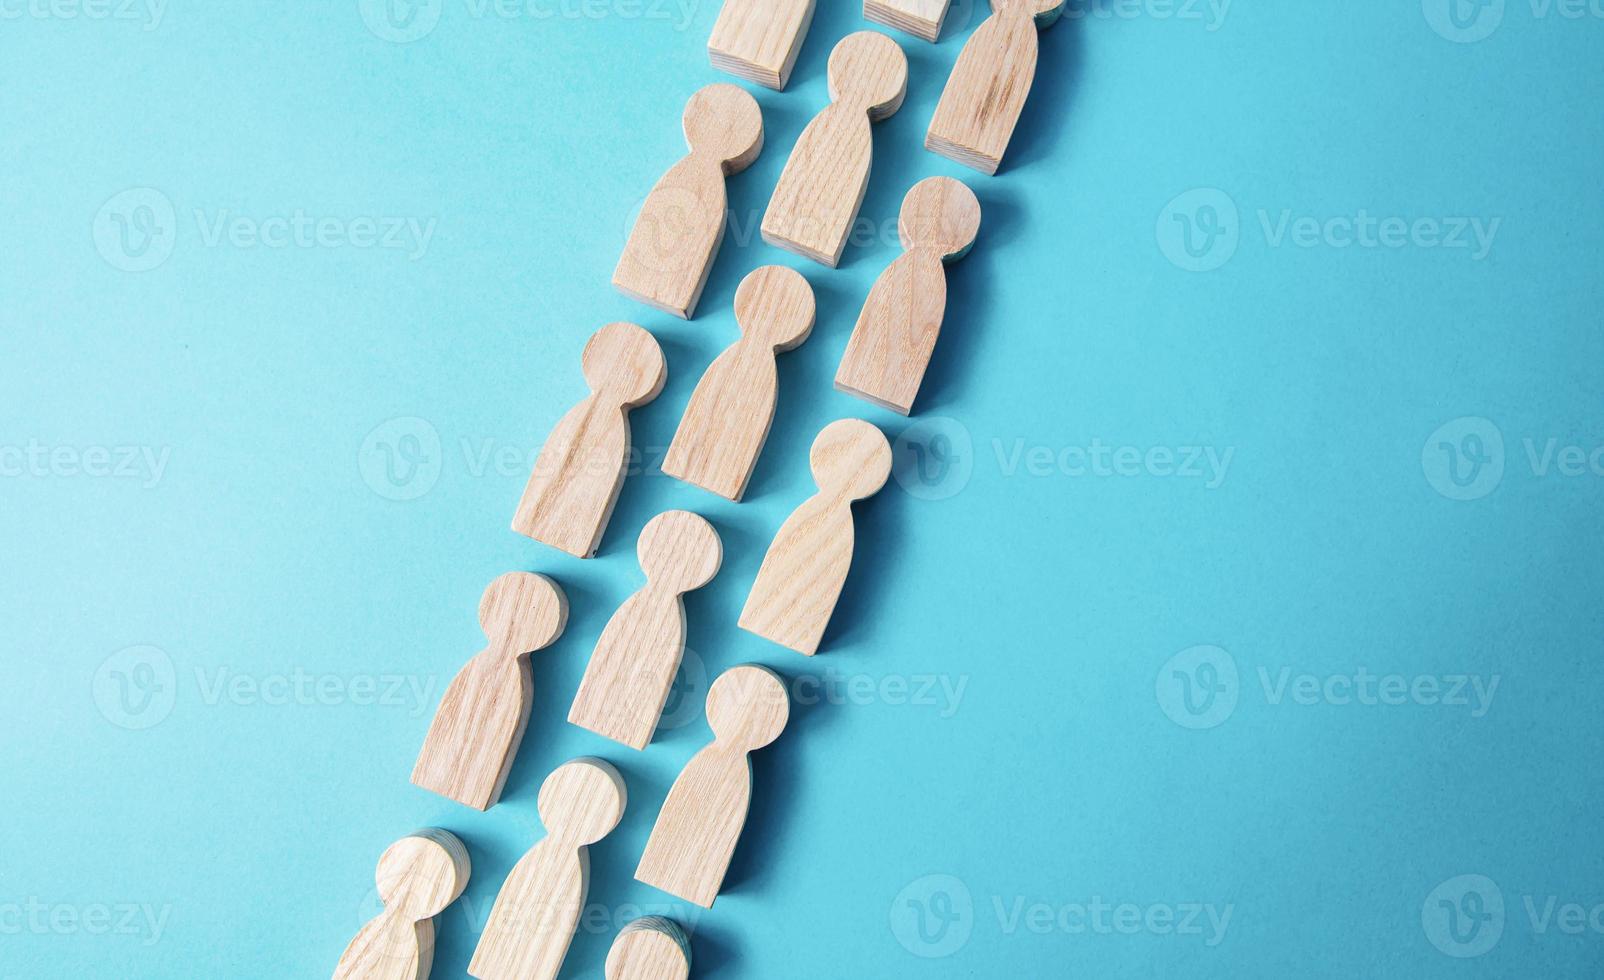 Chain people figures . Queue line. The movement of people in one direction. Human resources. Discipline. Social organization, joining consolidated forces. Team building. Common cause. Cooperation. photo